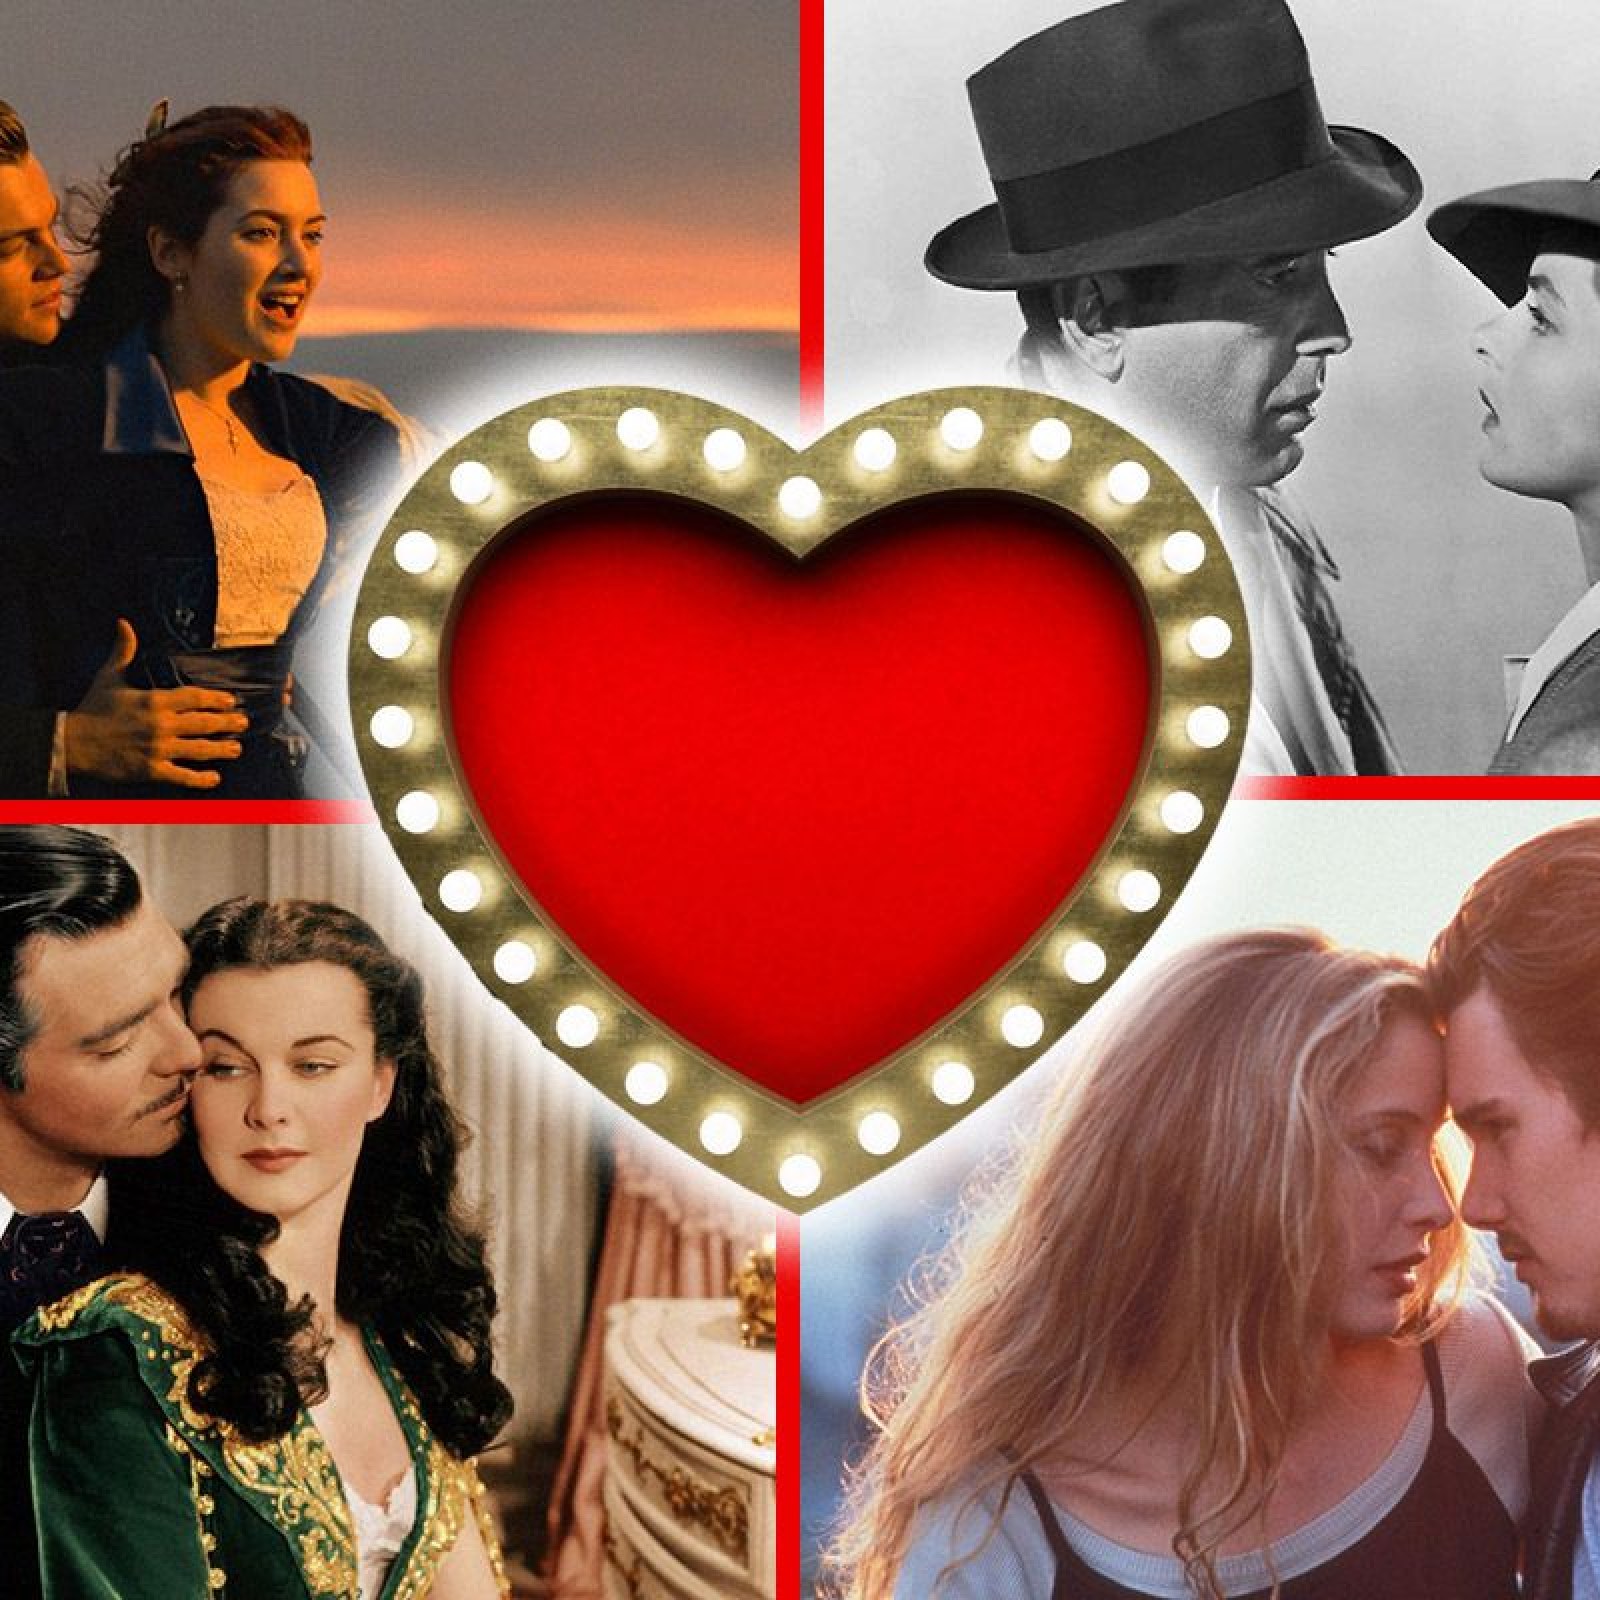 Ranked The 20 Best Romantic Movies to Watch on Date Night